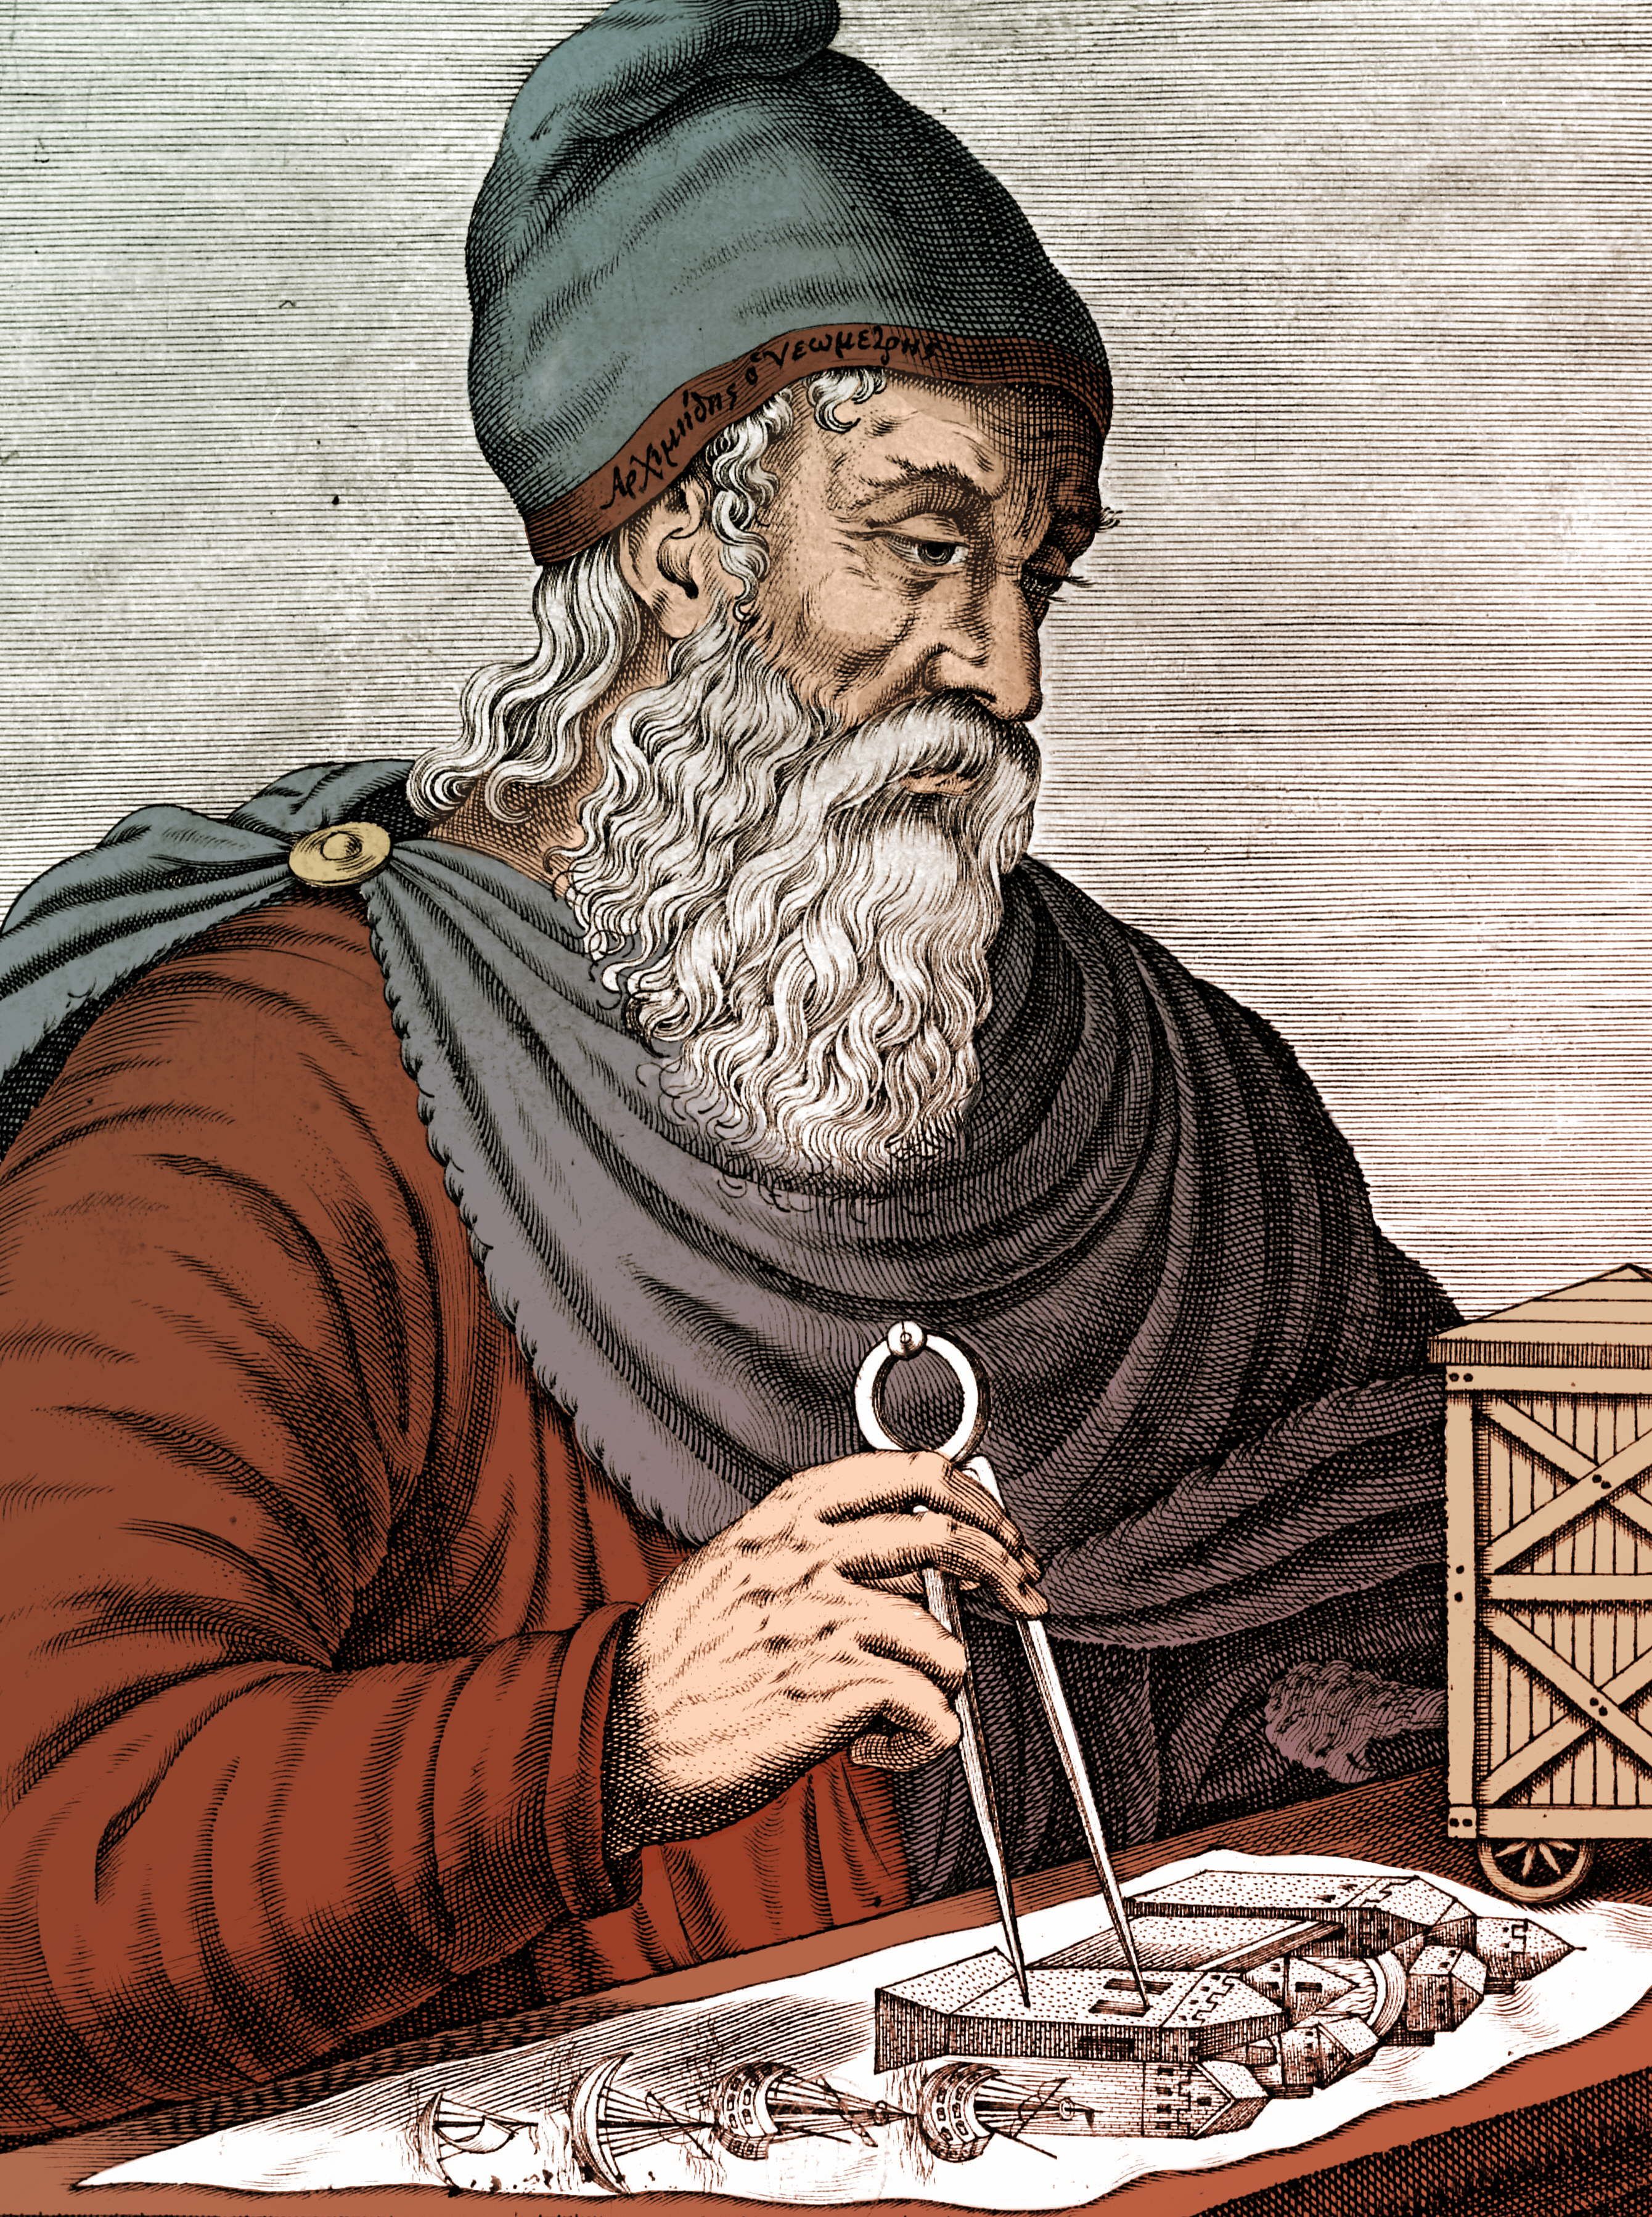 Pictures of Archimedes